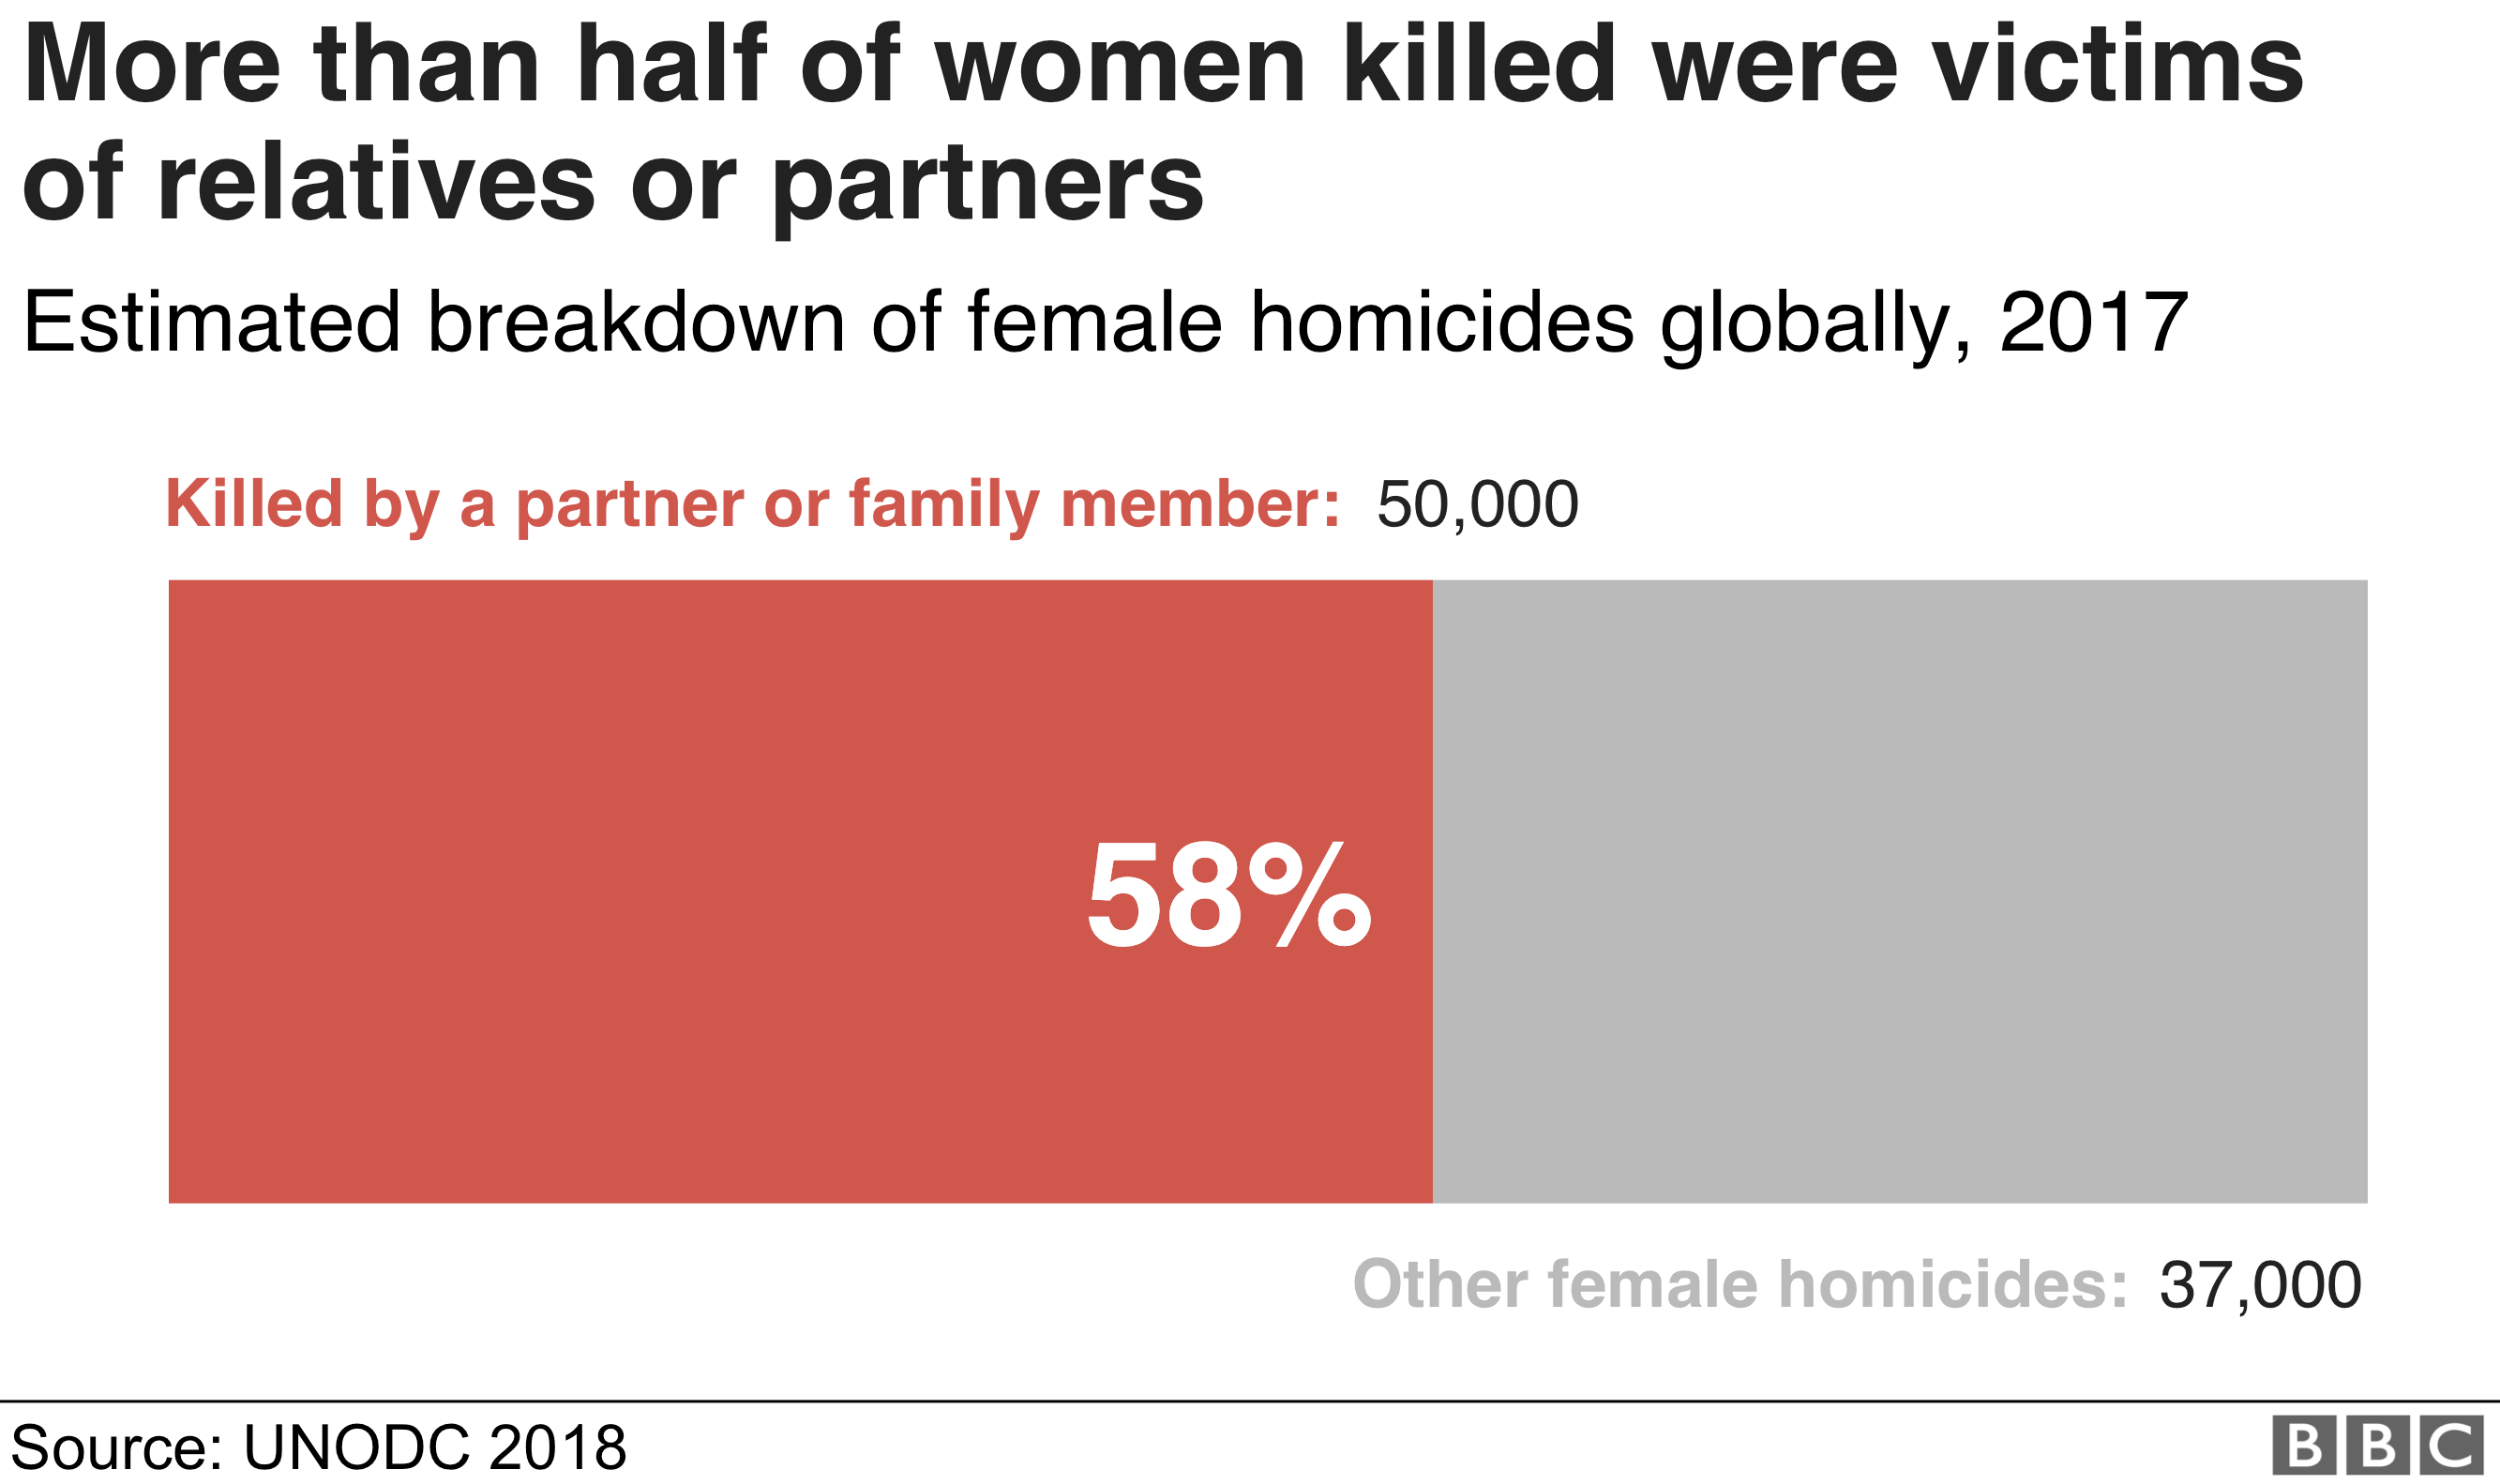 More than half of the women killed were victims of relatives or partners